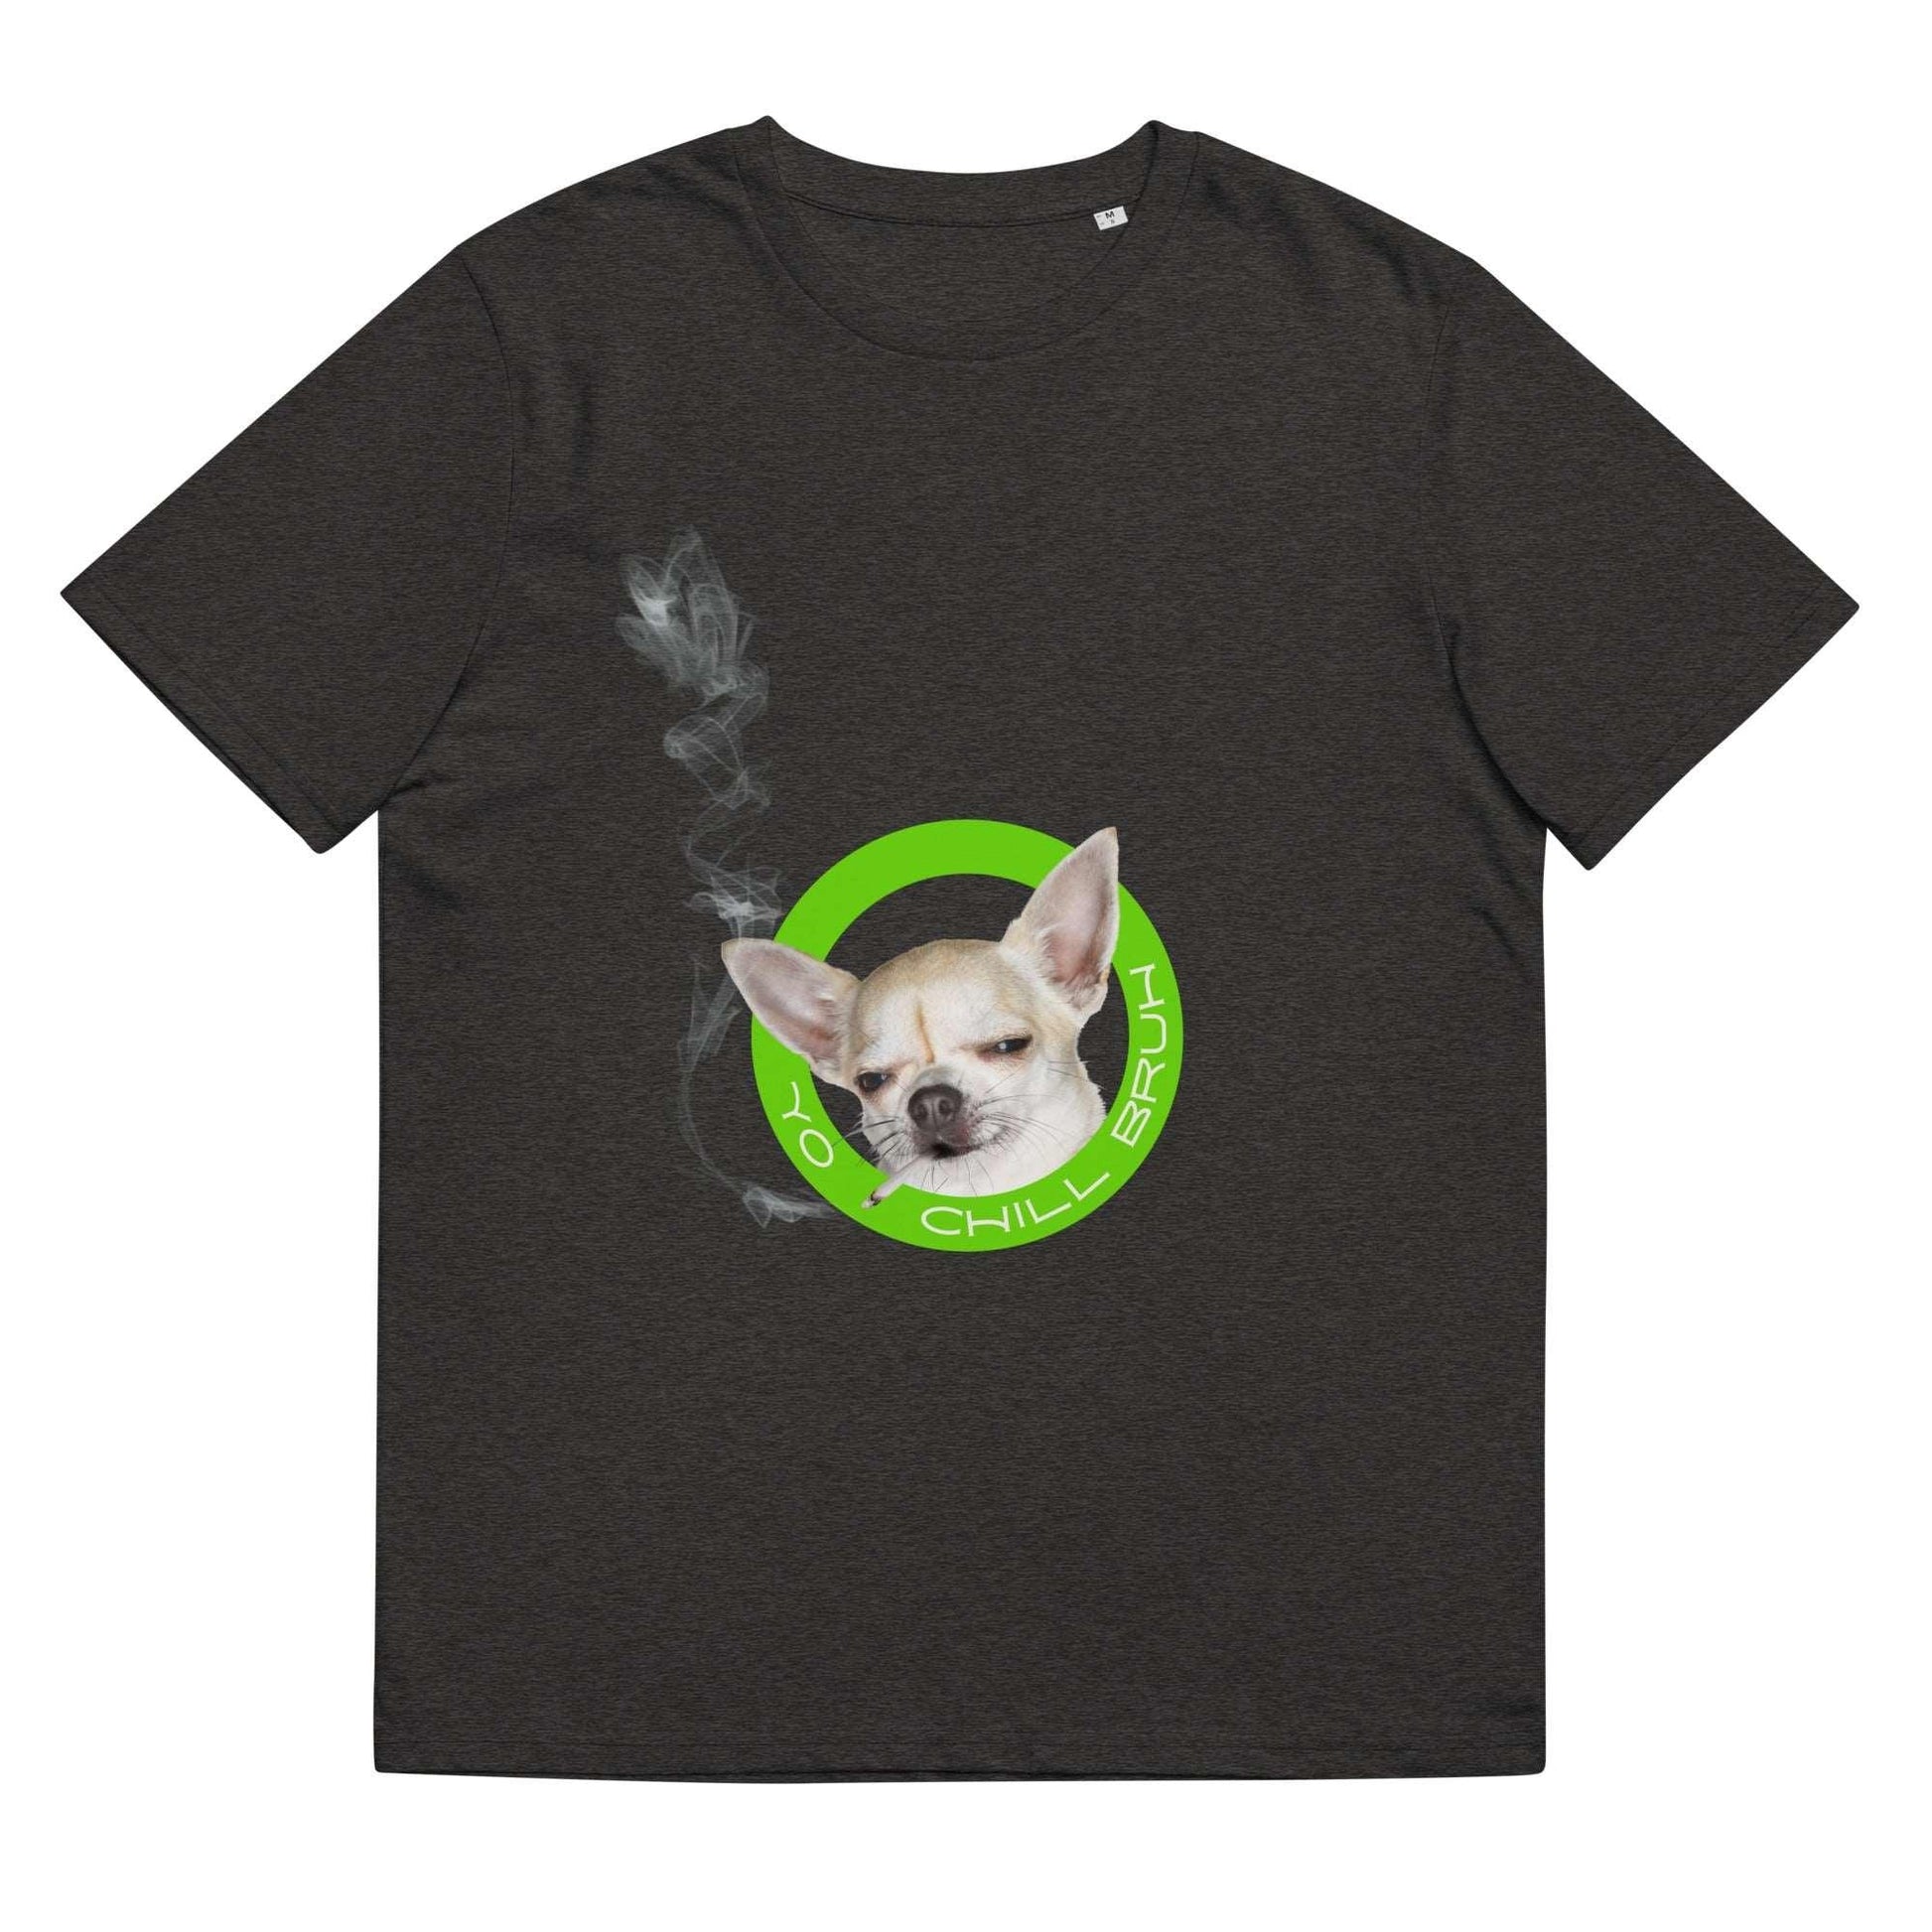 Yo Chill Bruh - very chill chihuahua smoking a cigarette - cool chihuahua meme t-shirt - funny! 100% pure organic cotton t-shirts - unisex sizes small through 5XL - for men and women. Available in dark grey, stargazer green, heather blue and khaki.